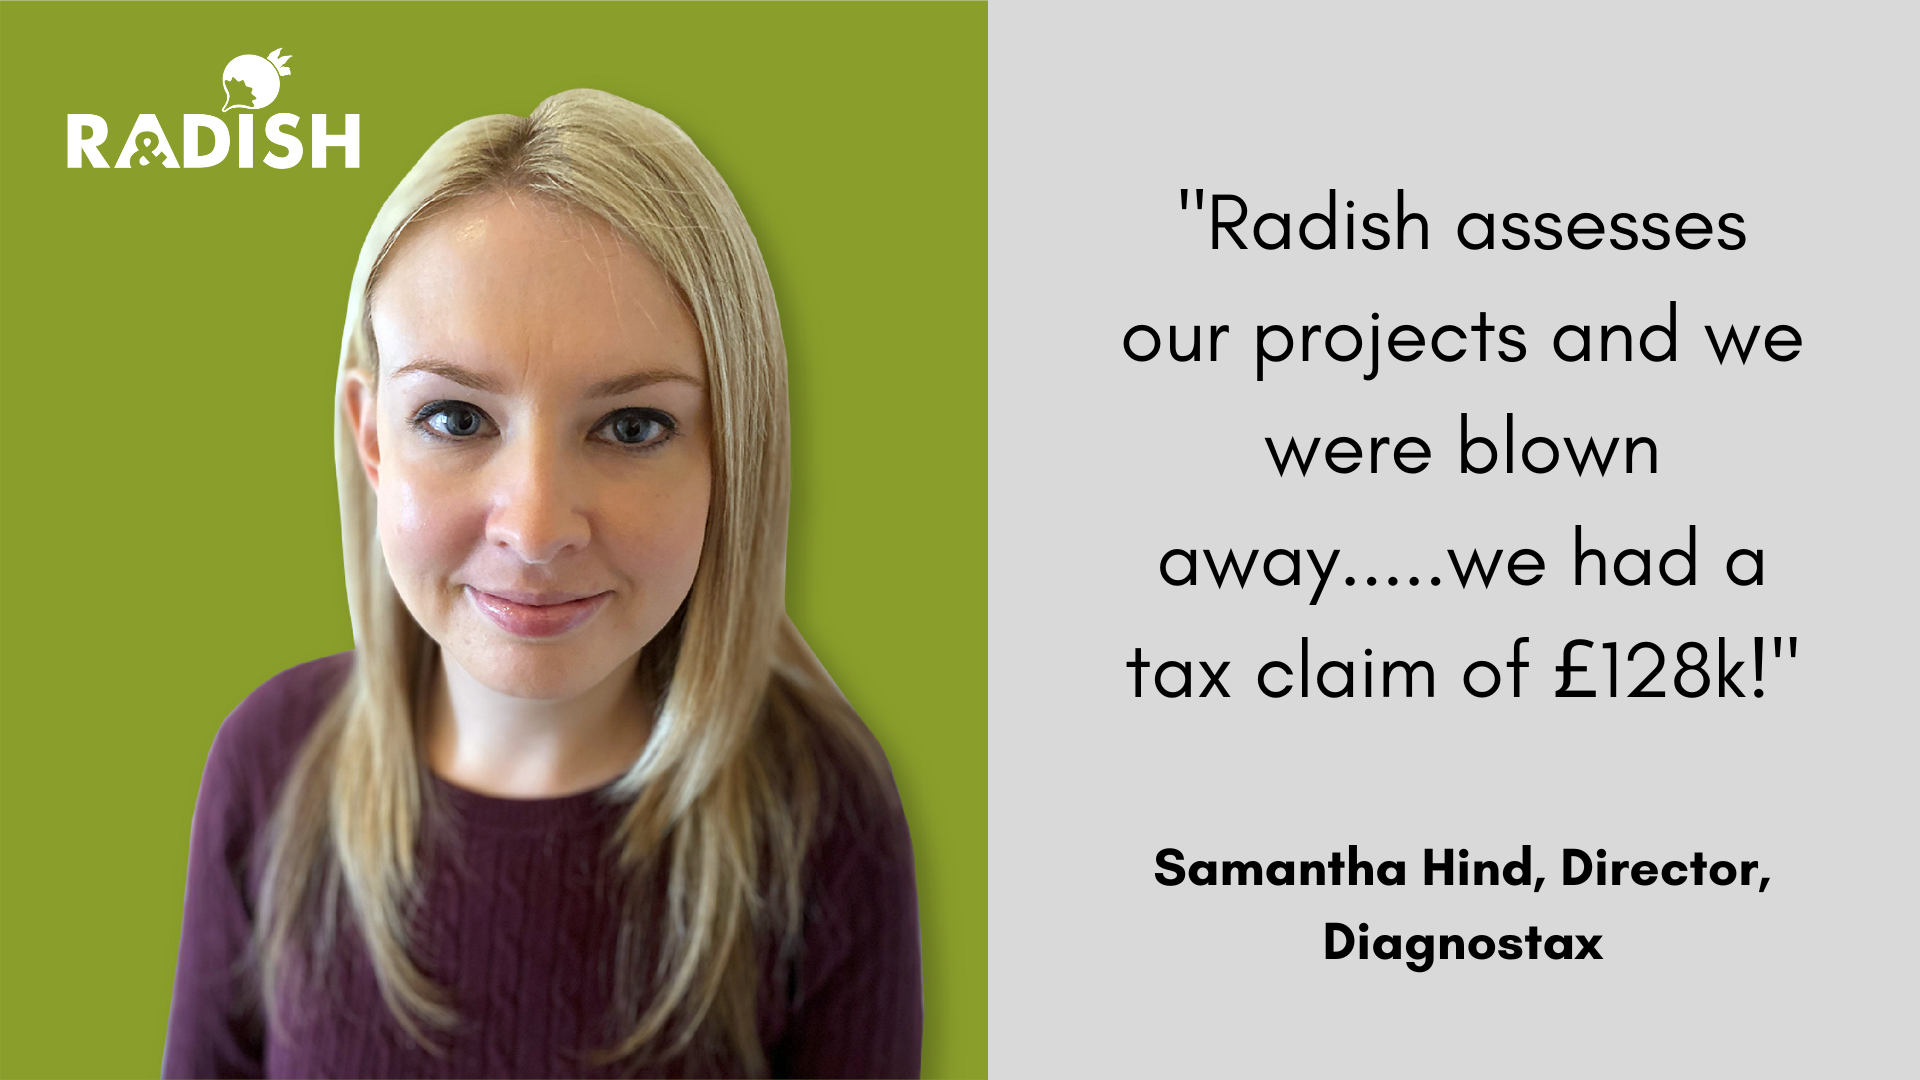 Radish assesses our projects and we were blown away.....we had a tax claim of £128k!